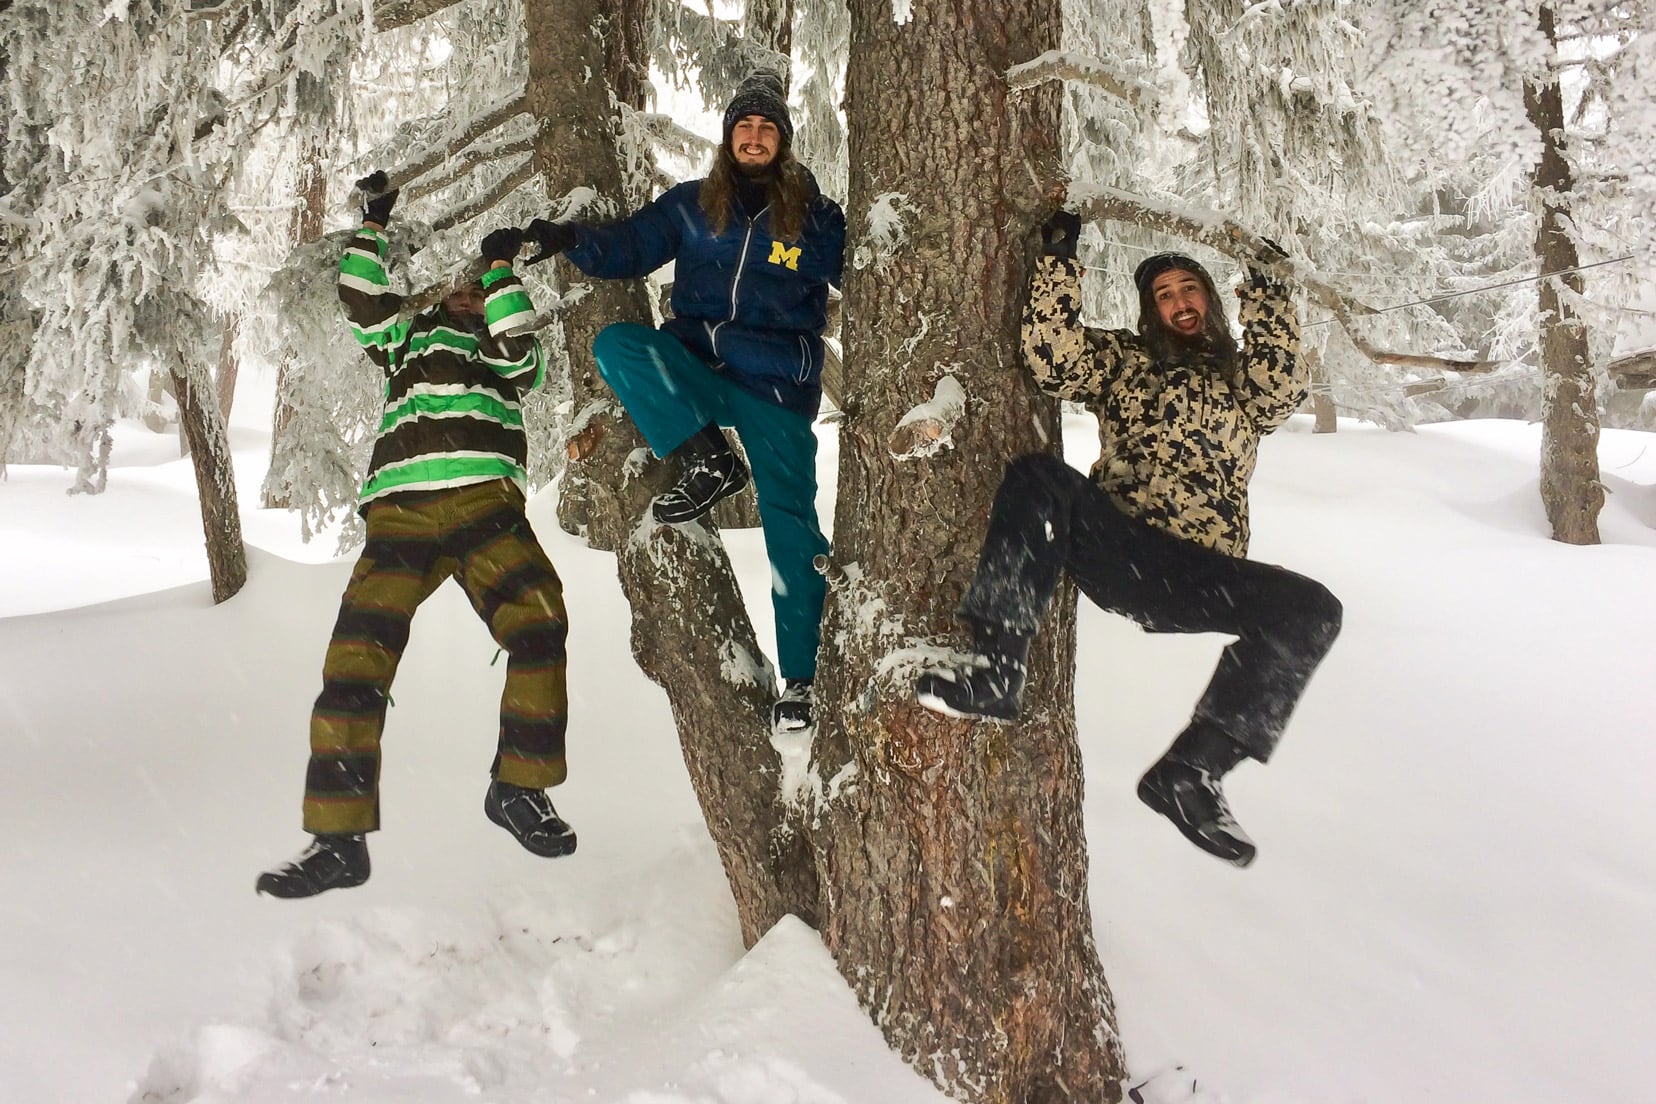 3-boys-swinging-in-the-snowy-pine-trees in Bettmeralp forest